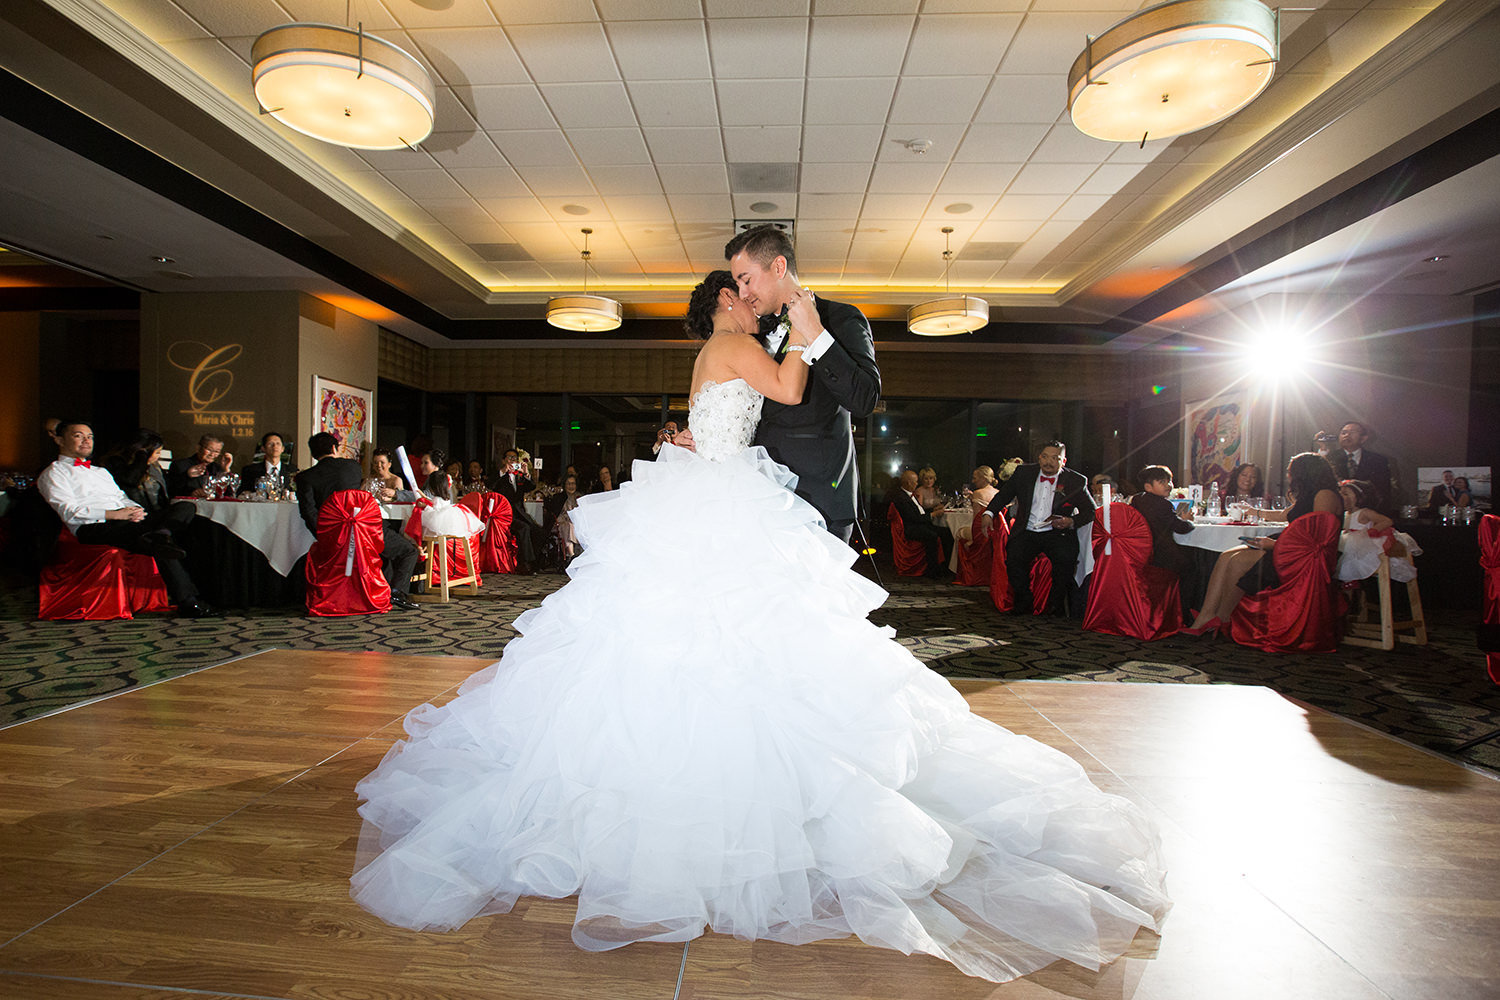 Flawless lighting this wedding reception first dance at the University Club